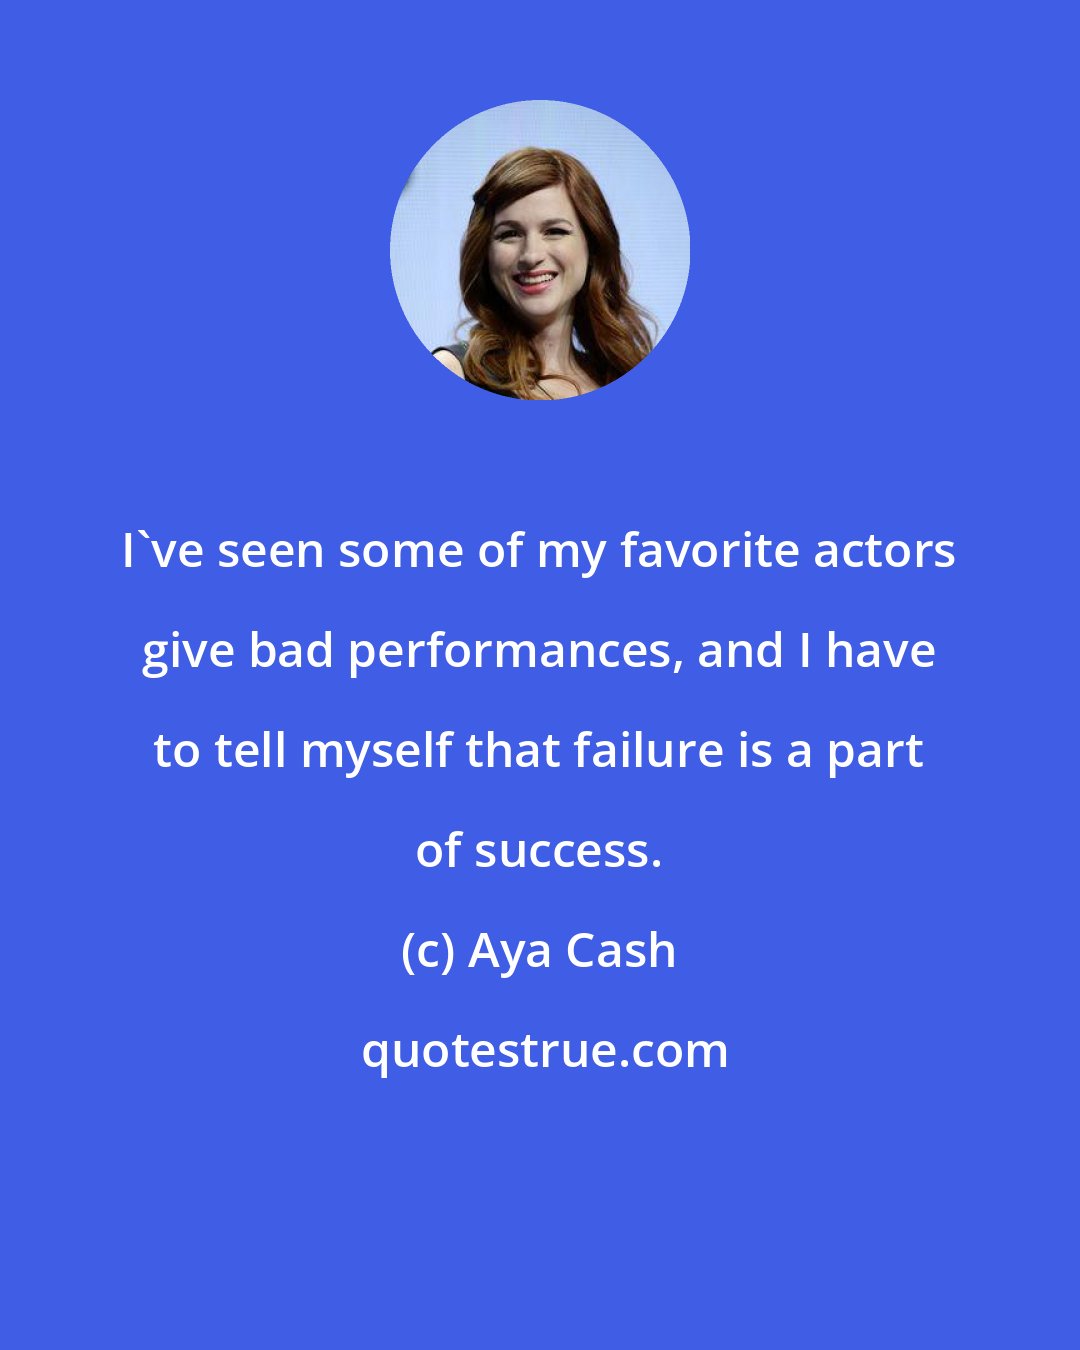 Aya Cash: I've seen some of my favorite actors give bad performances, and I have to tell myself that failure is a part of success.